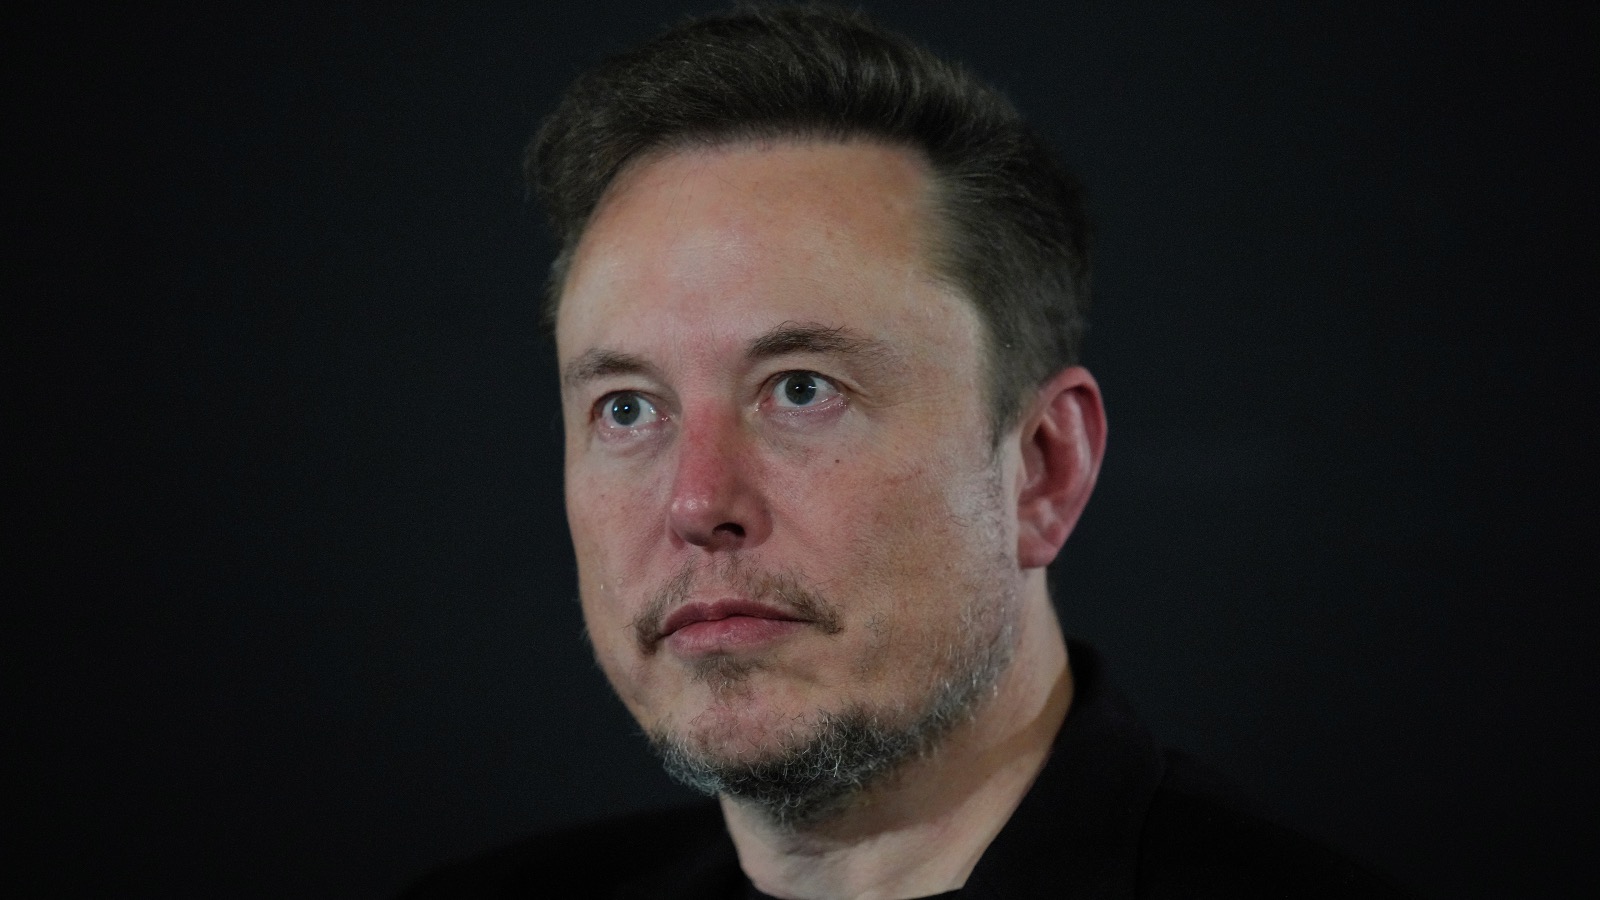 Elon Musk staring into the distance